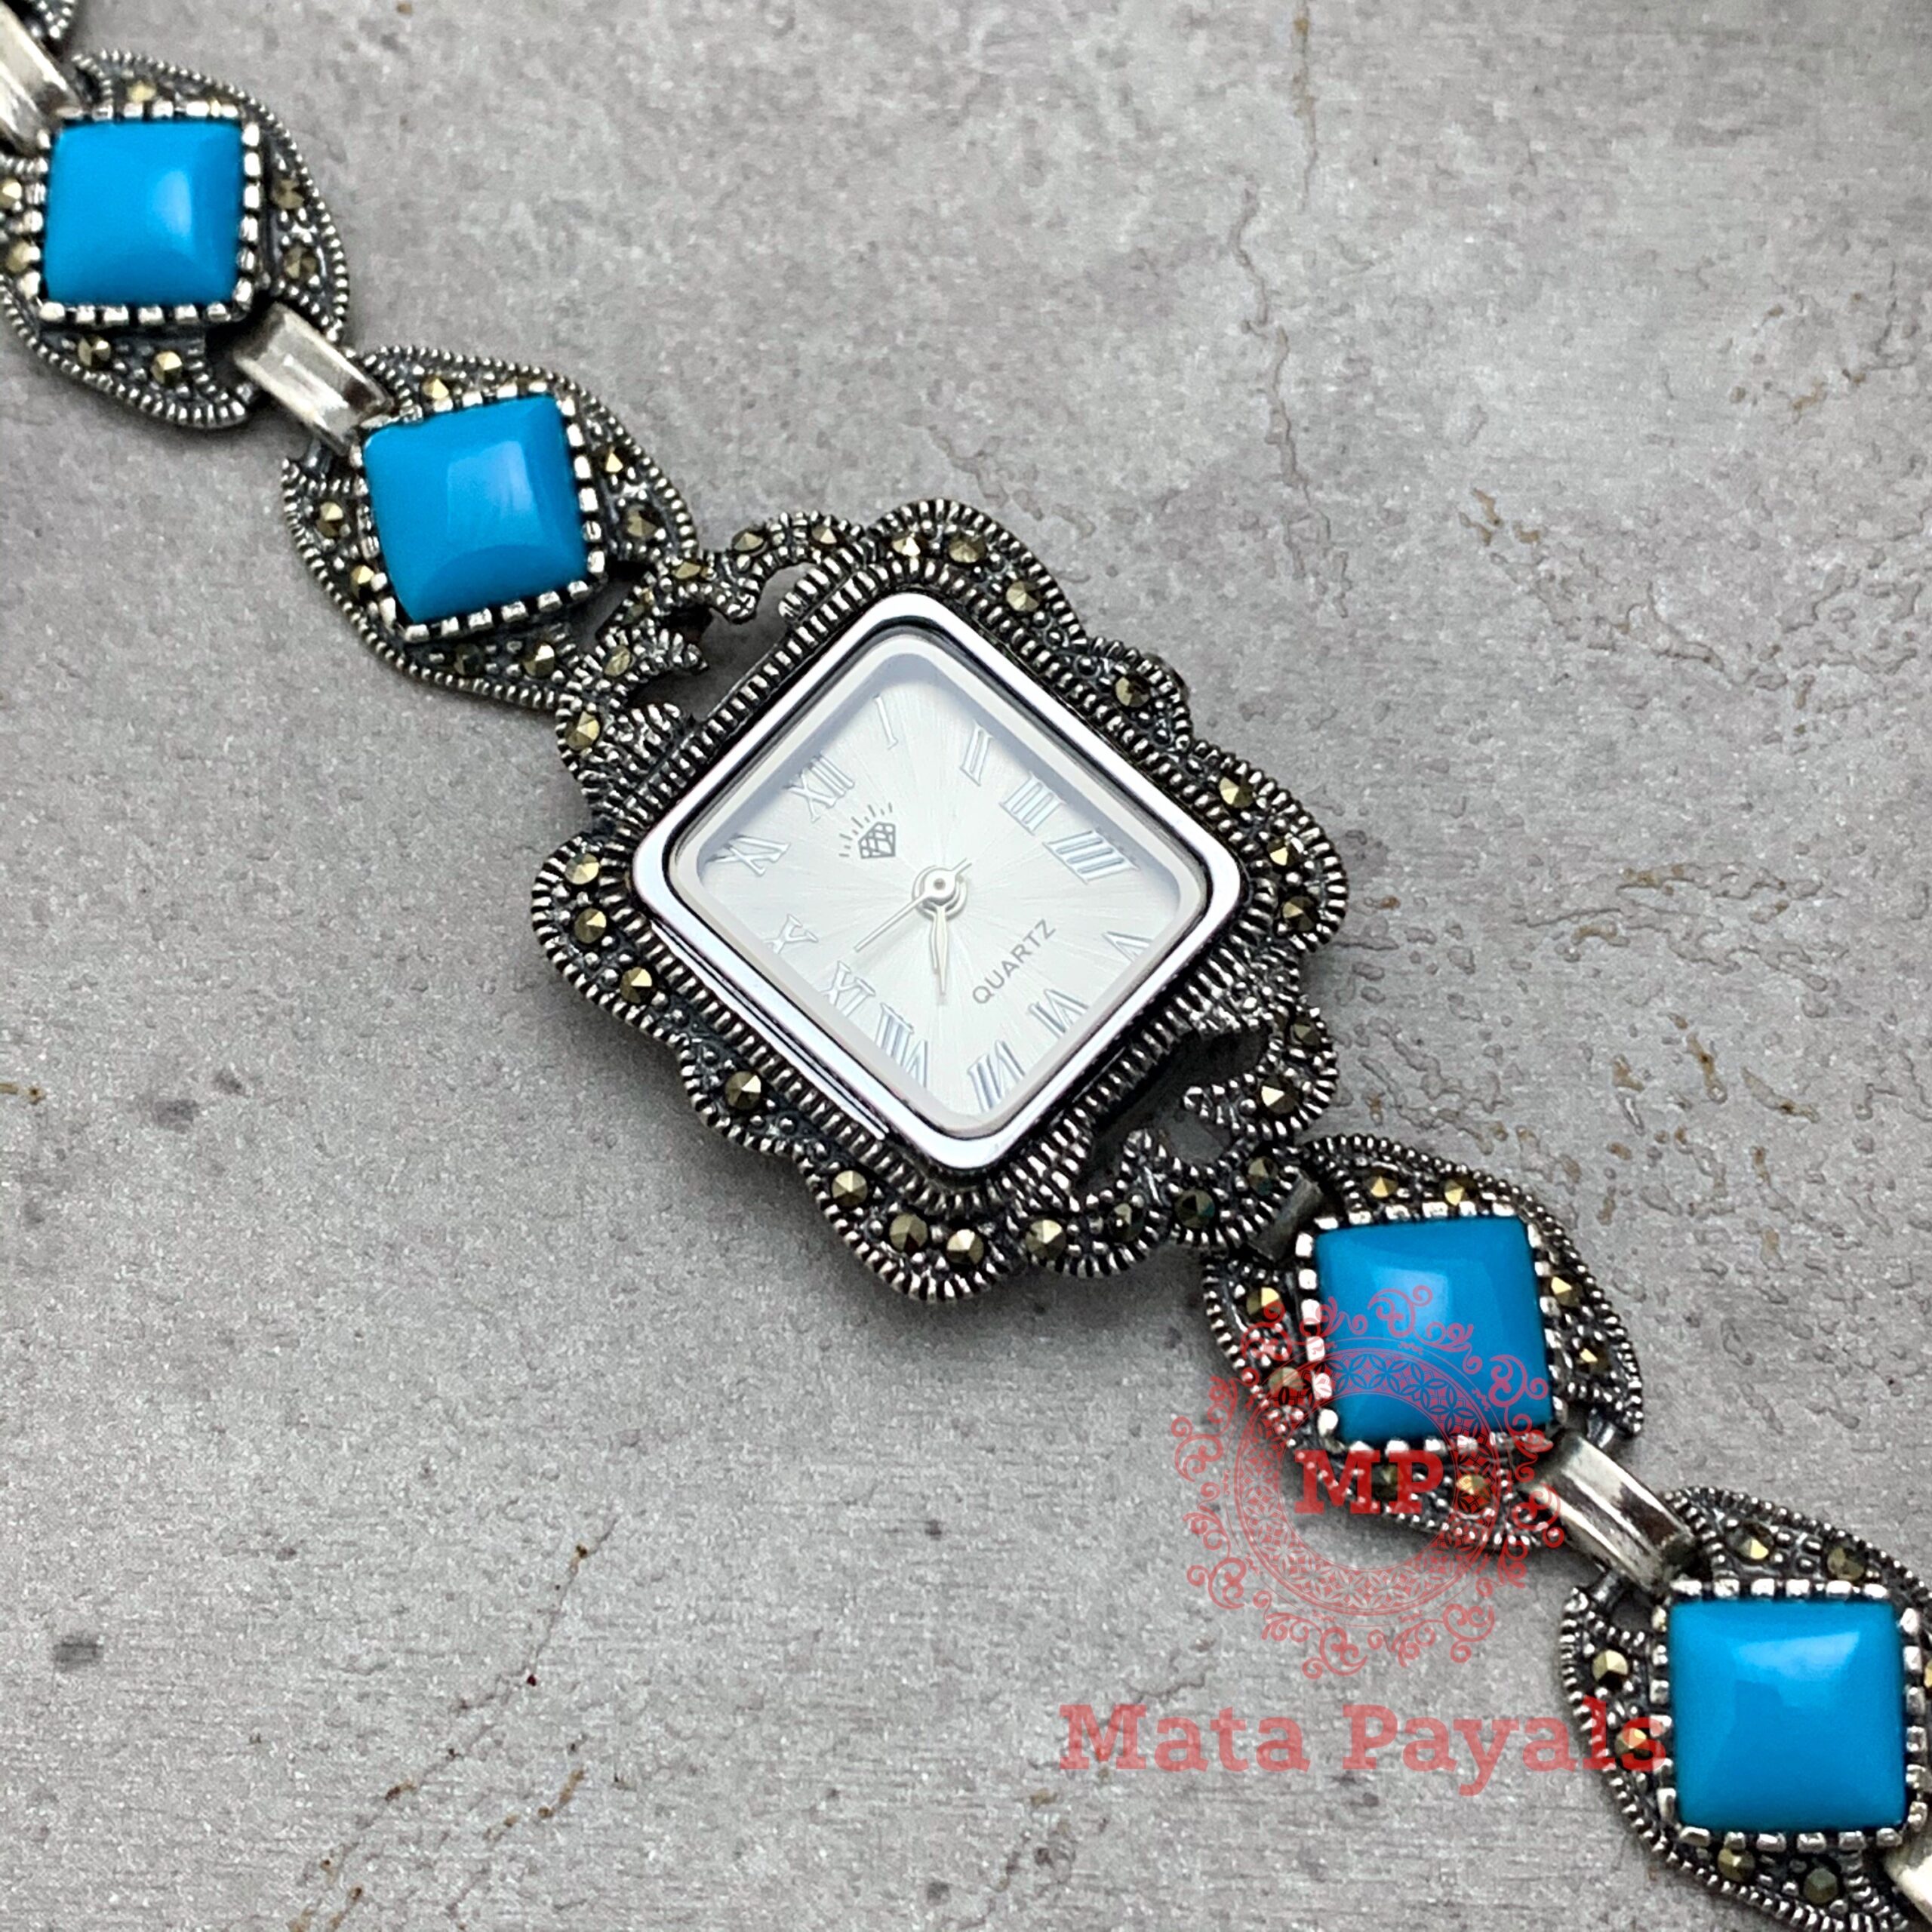 Breathtaking Turquoise Marcasite Watch